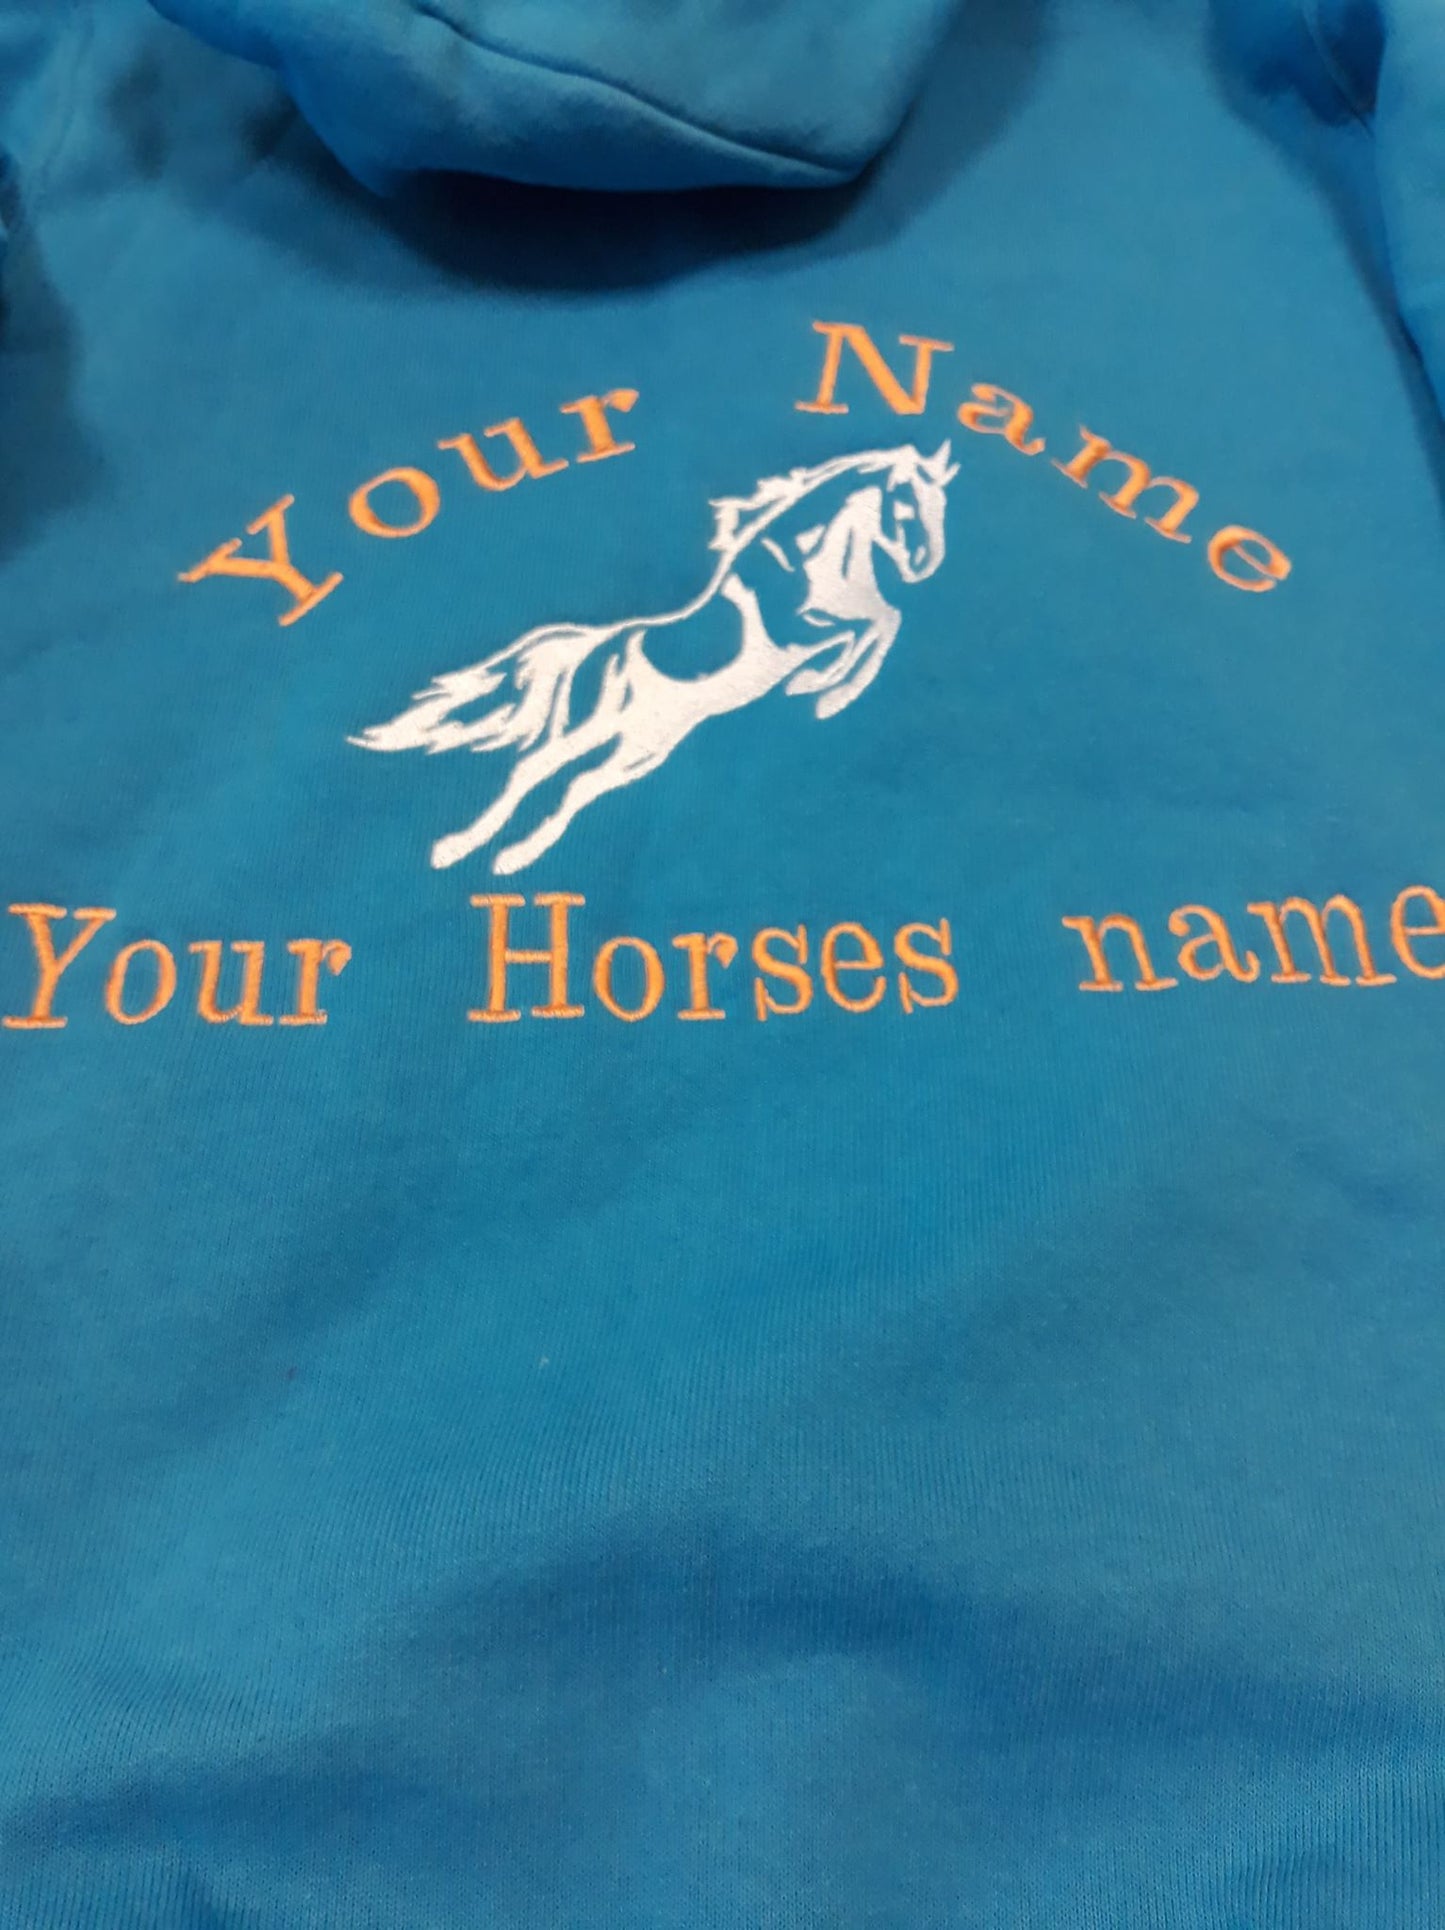 Personalised horse hoodie,personalised equestrian hoodie, personalised equestrian wear, personalised saddlecloths, personalised horse hoodie, equestrian embroidery, birthday present for horse lover, gift for horse rider, personalised horse rider hoodie, show jumping hoodie 